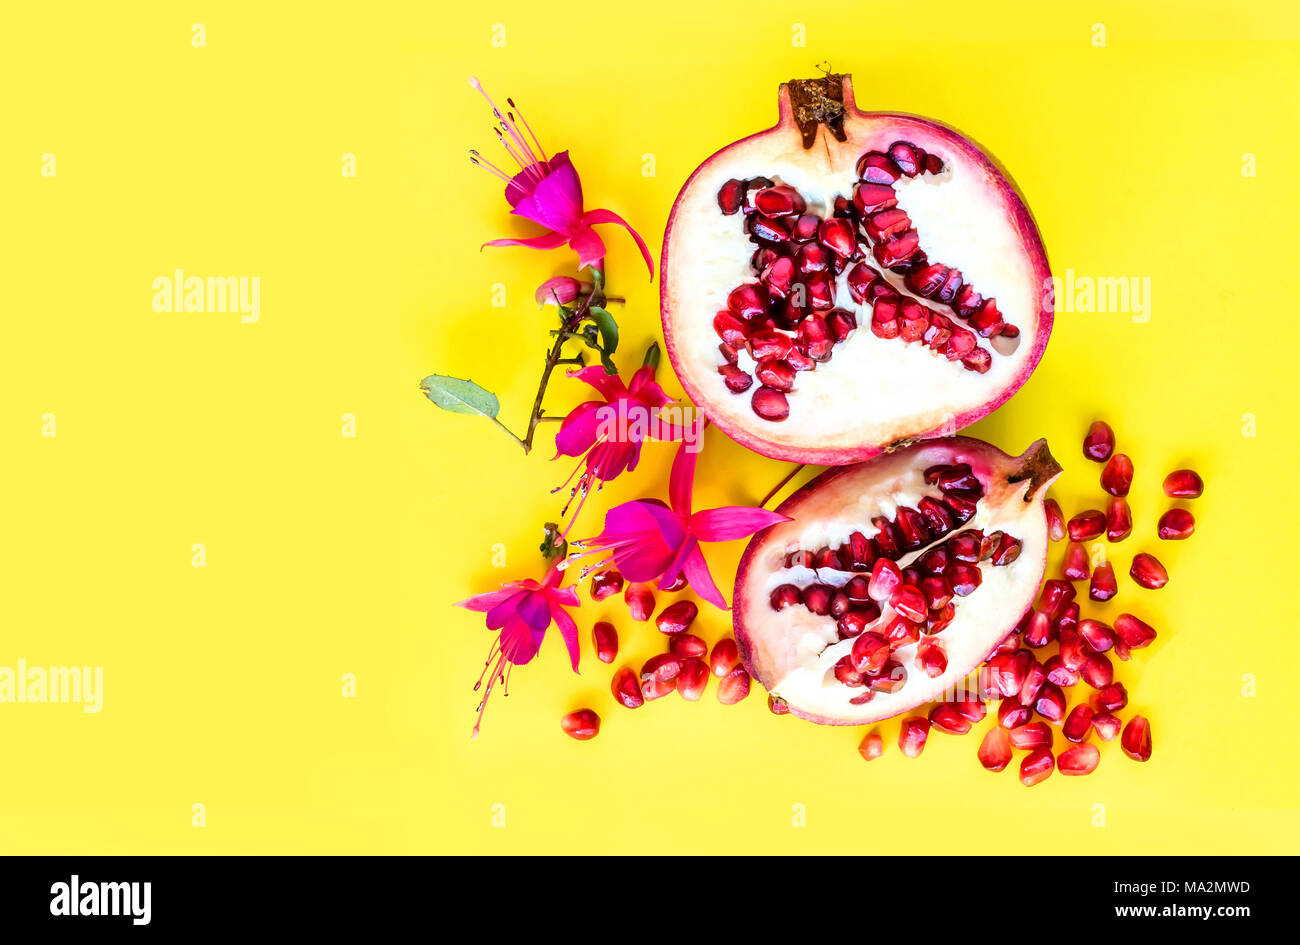 Pomegranate fruit with flowers, flat lay view. Stock Photo